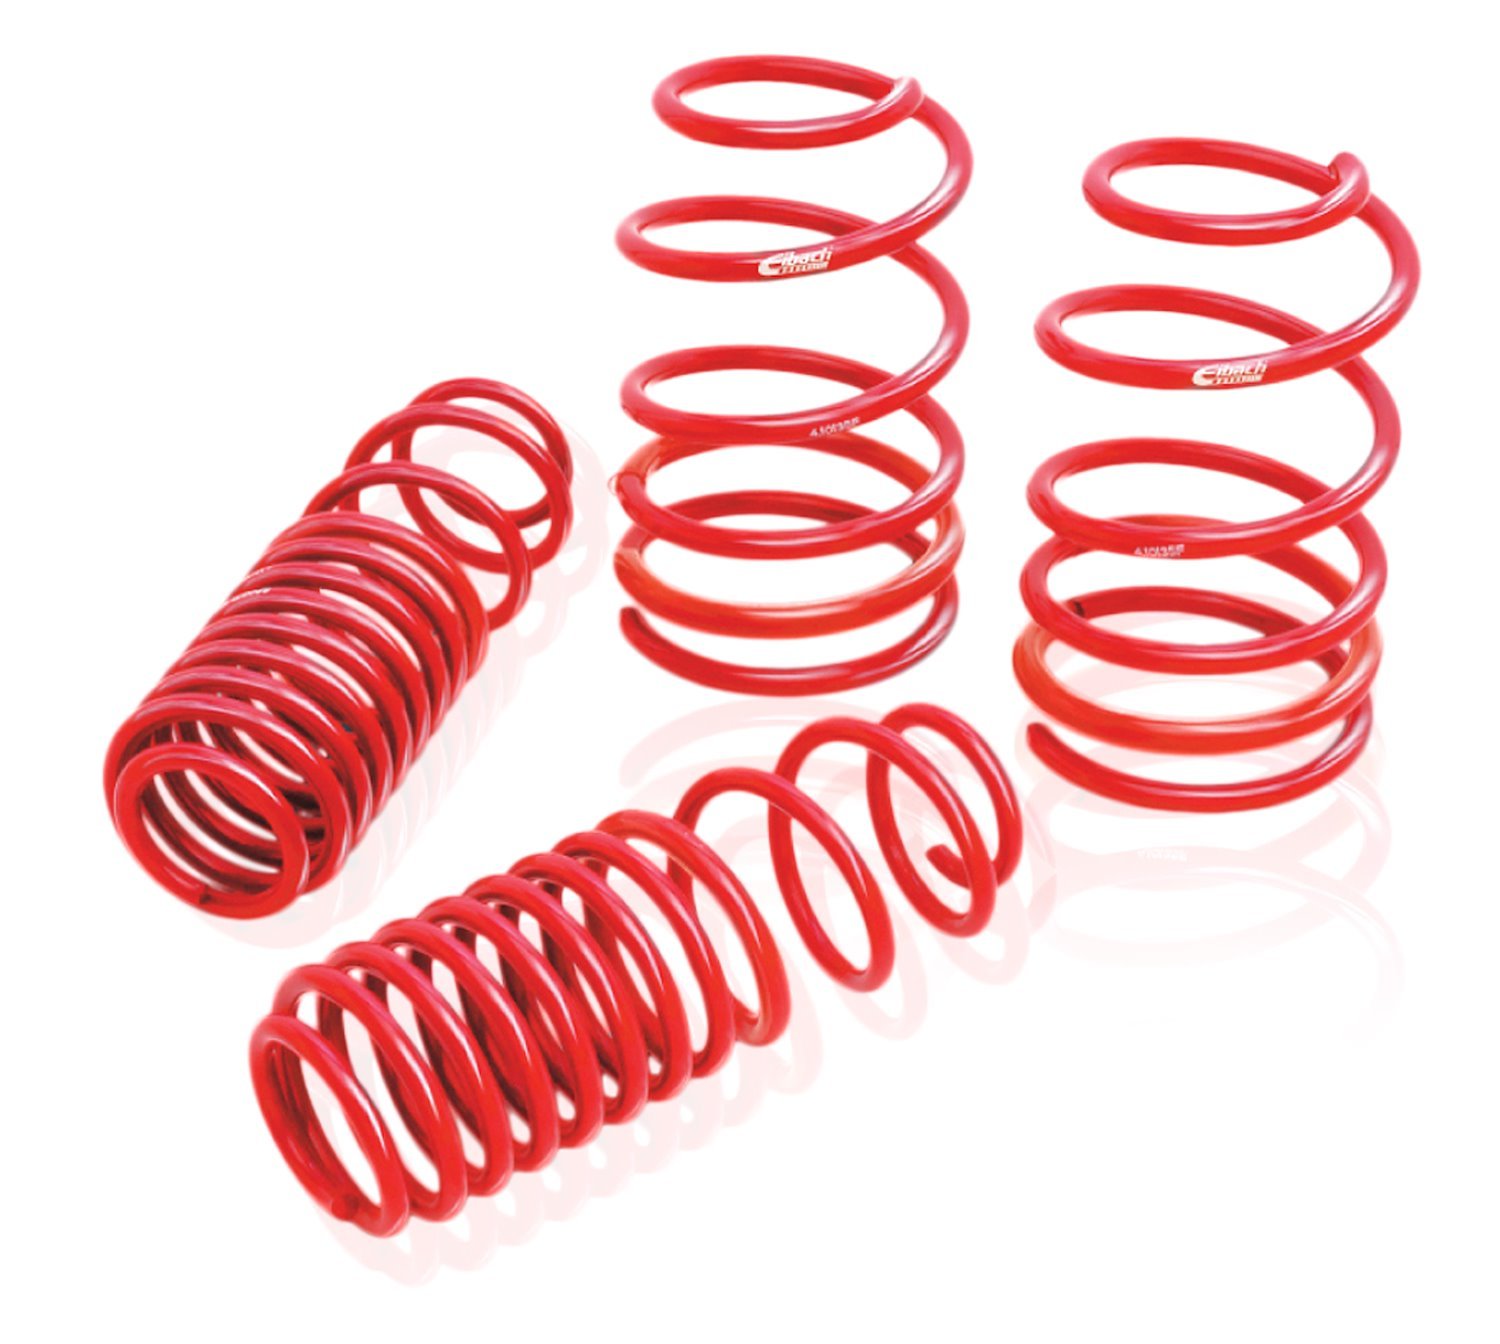 4.0782 Sportline Extreme Lowering Springs 1990-99 Toyota Celica - 1.5" Front/Rear Drop